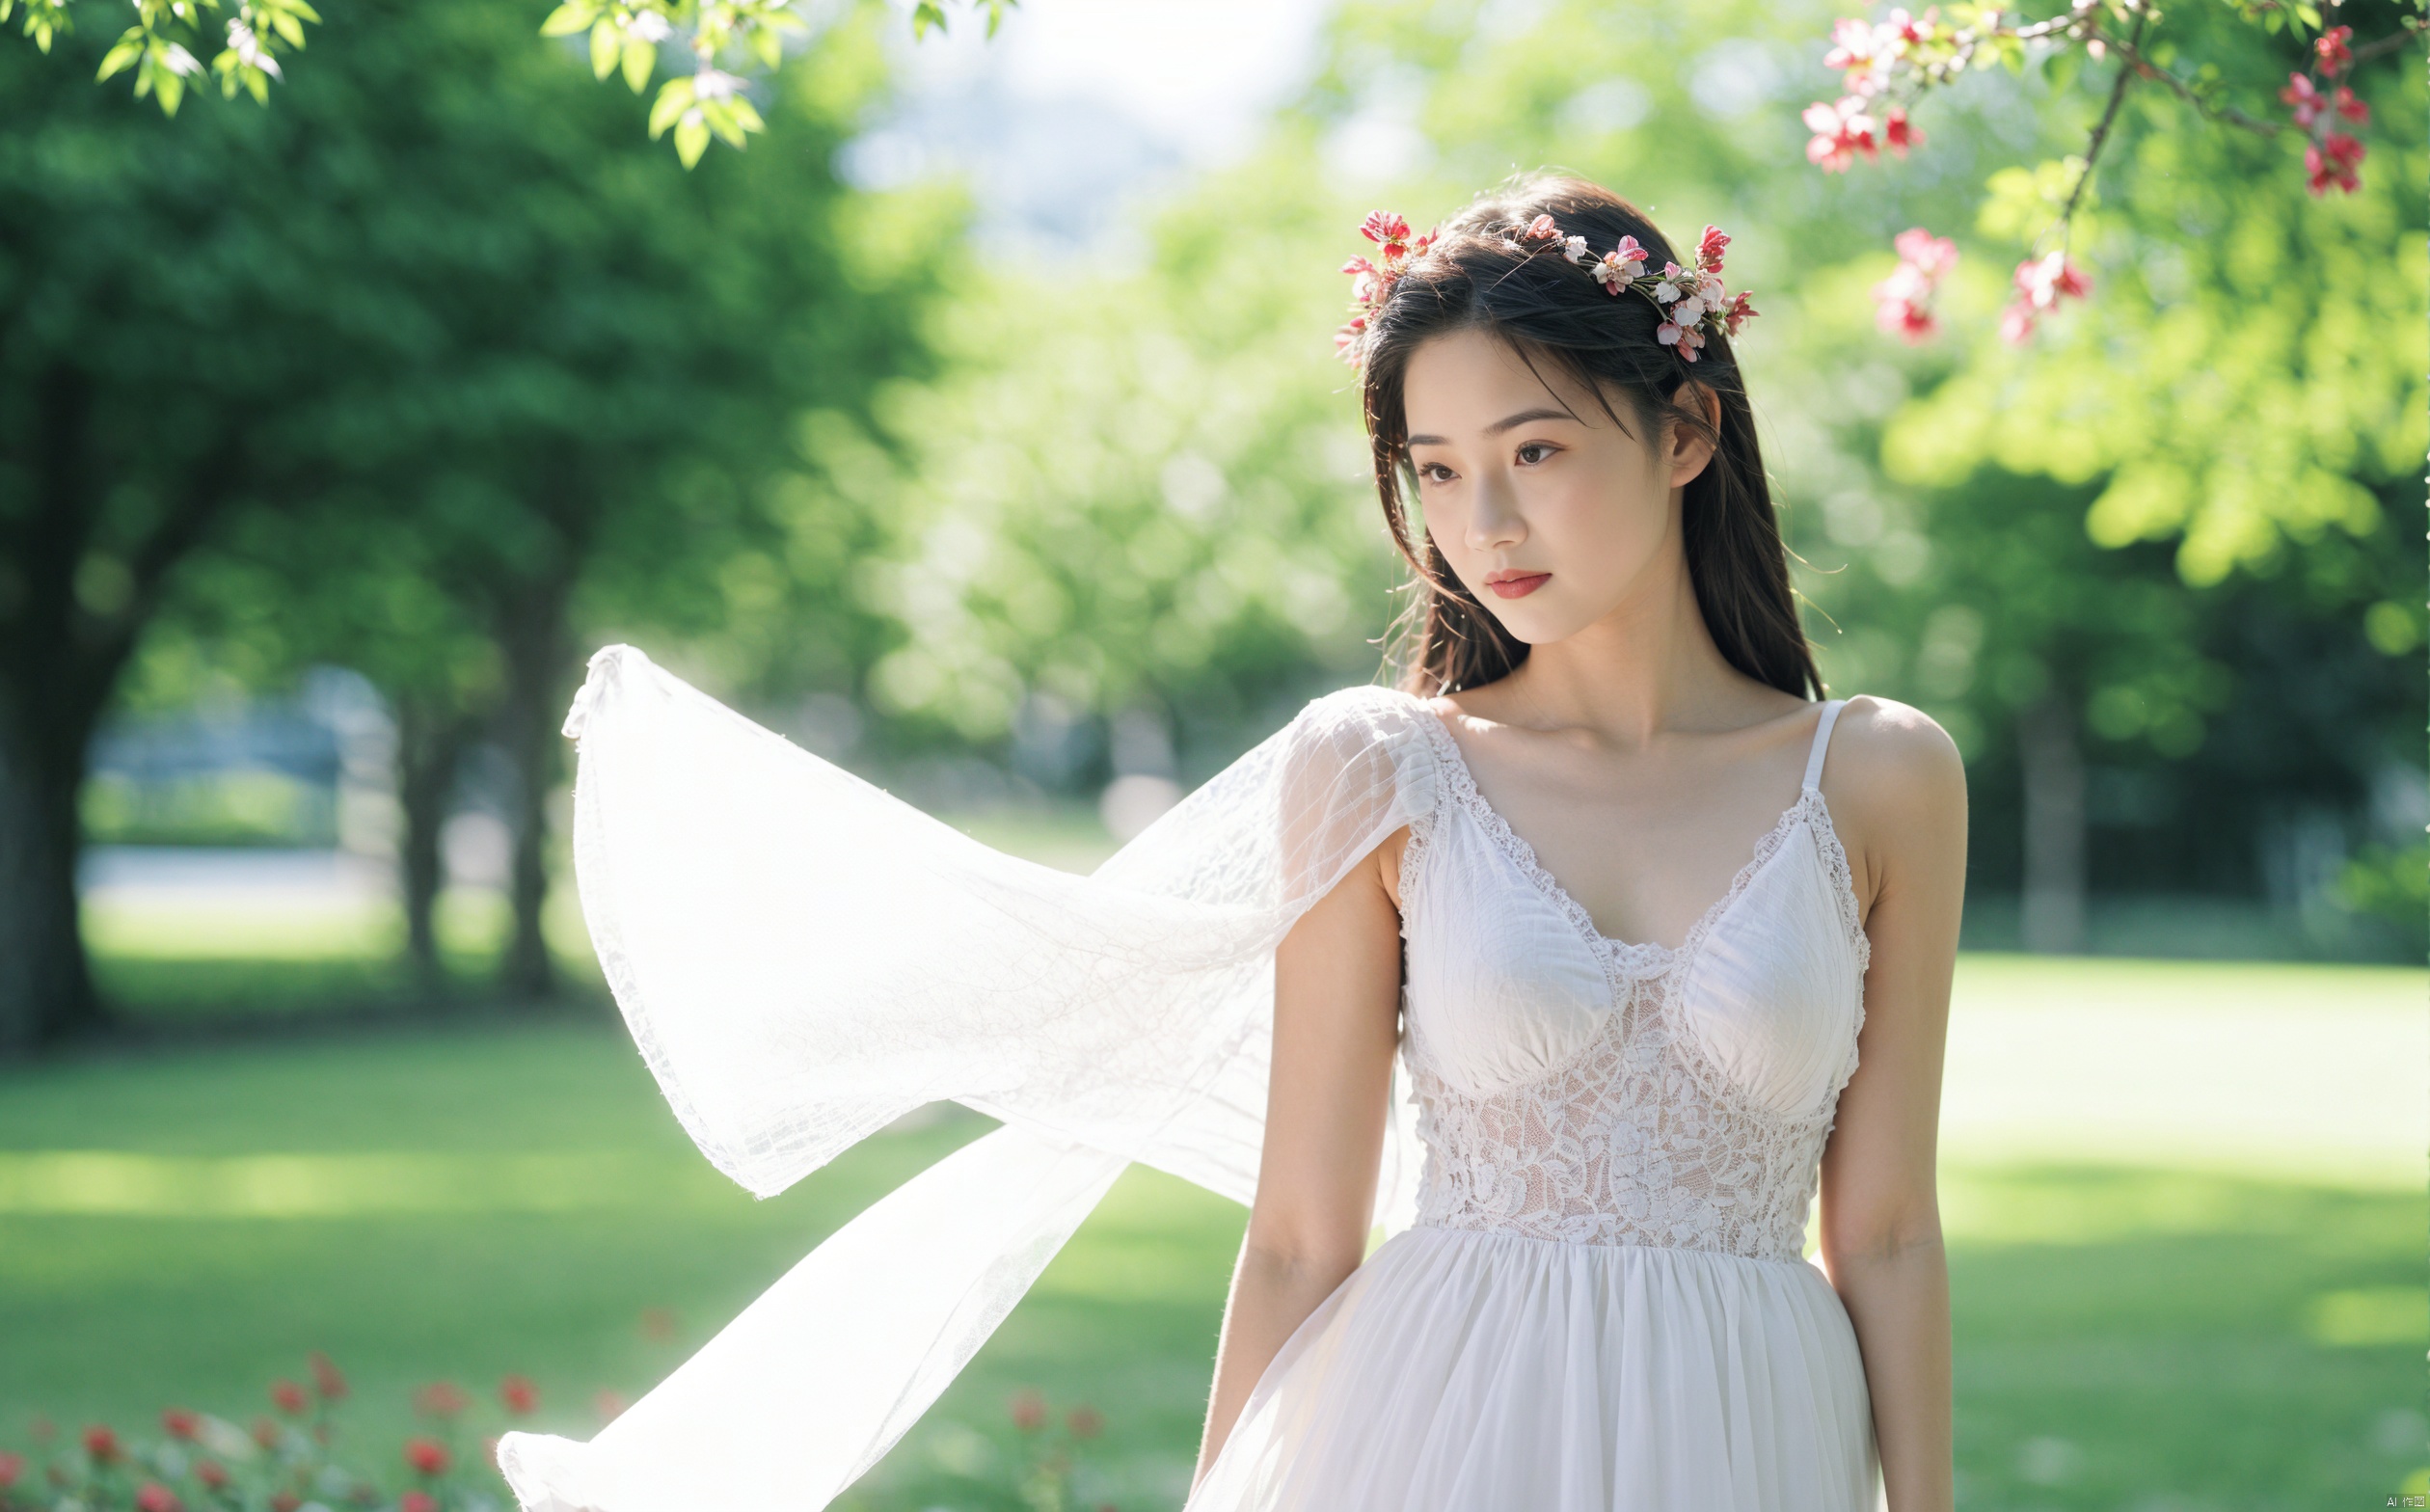  masterpiece, best quality, ultra high res, sexy beauty, slim figure, middle breasts, wearing lace maxi dress；A young girl with a slim figure and a large chest is wearing a long lace dress. She is standing in a field of flowers, with the sun shining on her face. The wind is blowing through her hair, and the flowers are swaying in the breeze. She is looking over her shoulder at the camera, with a seductive expression on her face. The field is filled with a variety of colorful flowers, and the air is filled with the scent of jasmine. The atmosphere is romantic and sensual. The camera is focused on the girl's body, with a shallow depth of field, chenchen, SaayaIrie, jiaxin